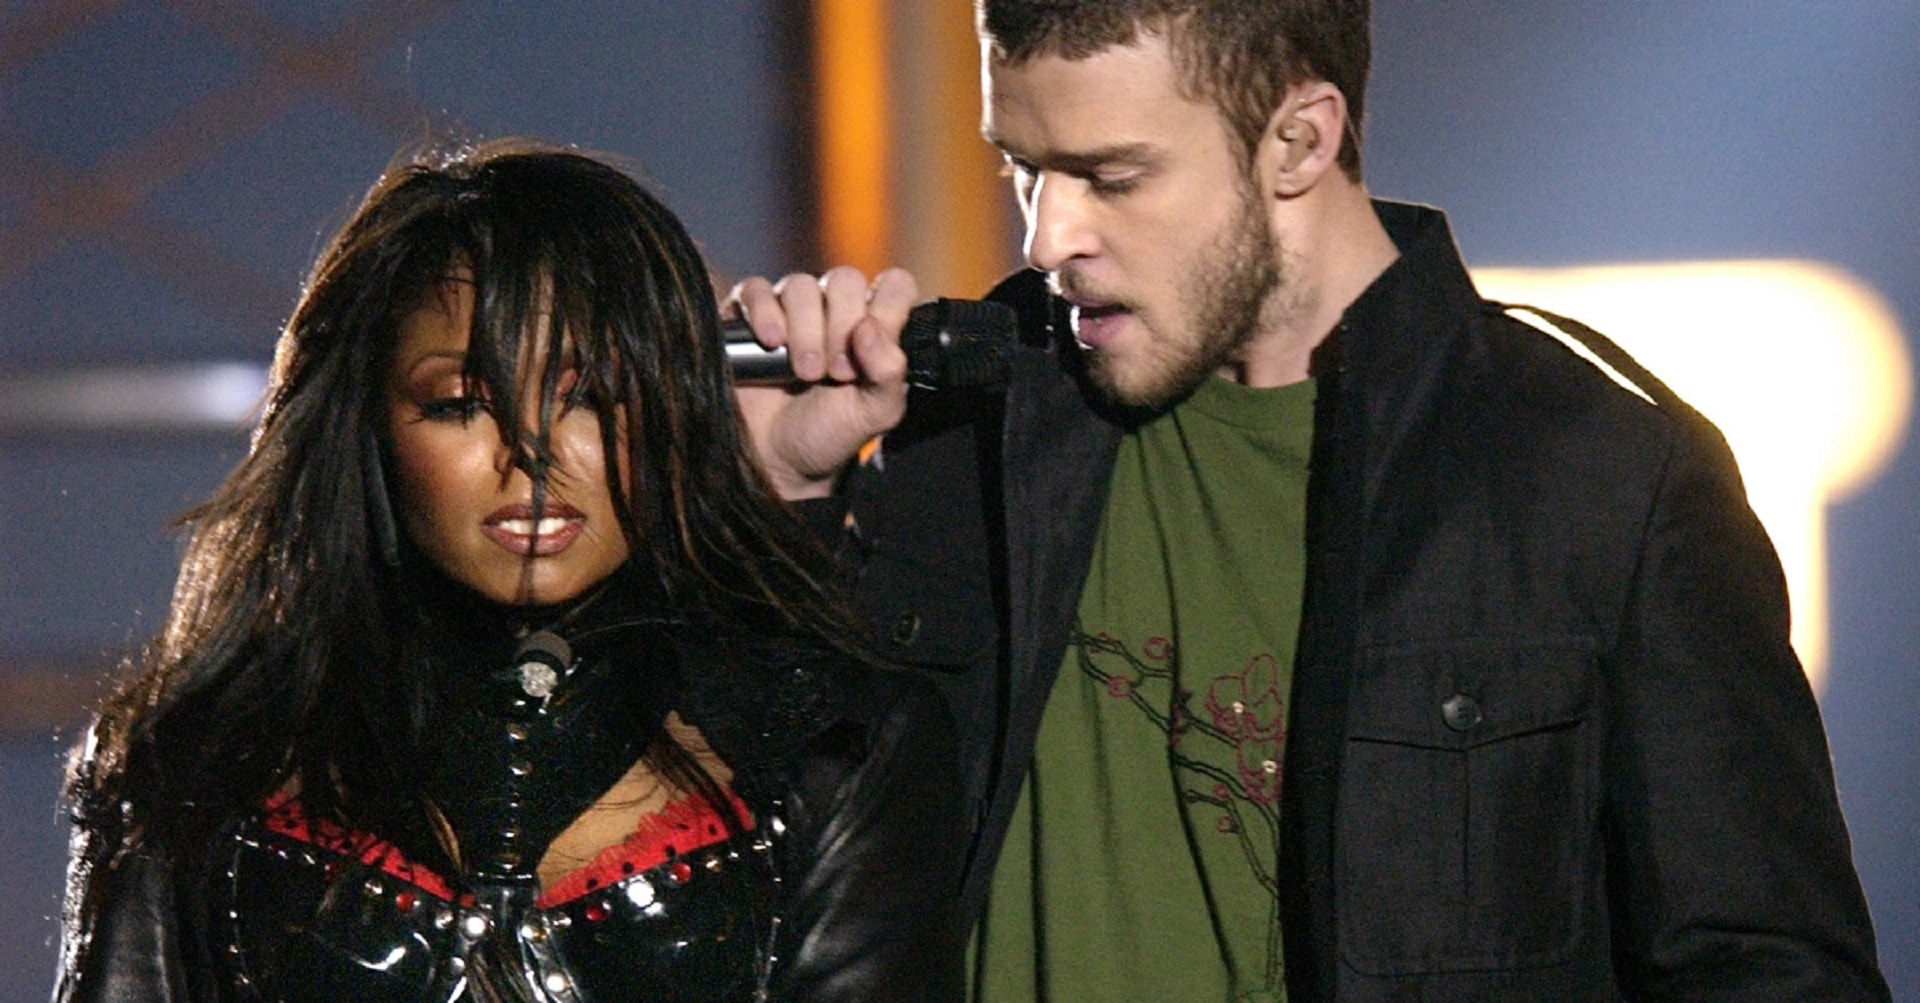 Here Is How Janet Jackson’s Brothers Have Responded To Justin Timberlake’s Apology Over Super Bowl Controversy